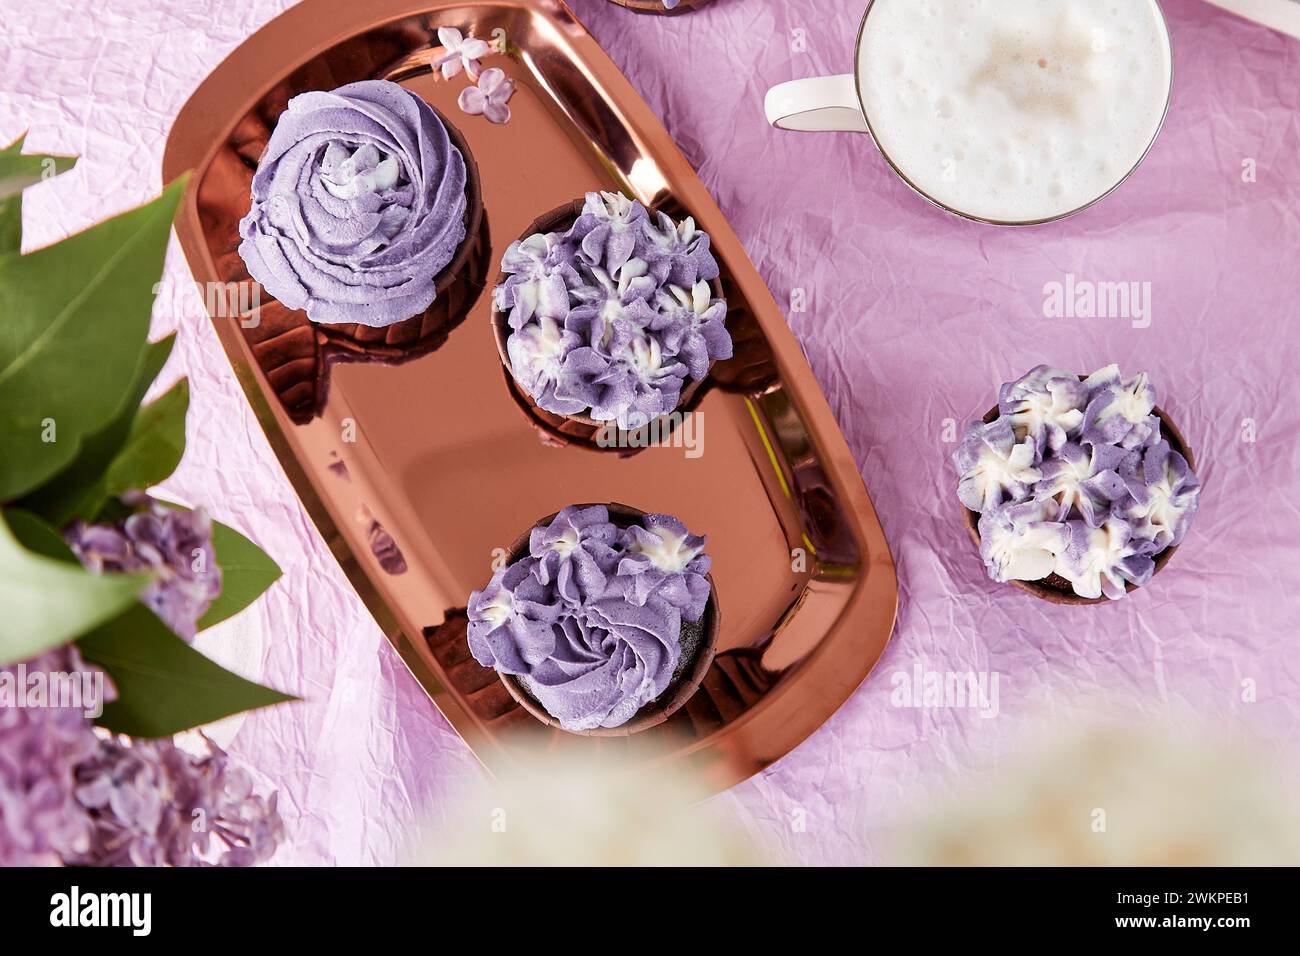 Festive aesthetic holiday table. Purple french cupcakes with cup of coffee. Desserts, coffee and lilac flowers. Feminine lifestyle. Stock Photo